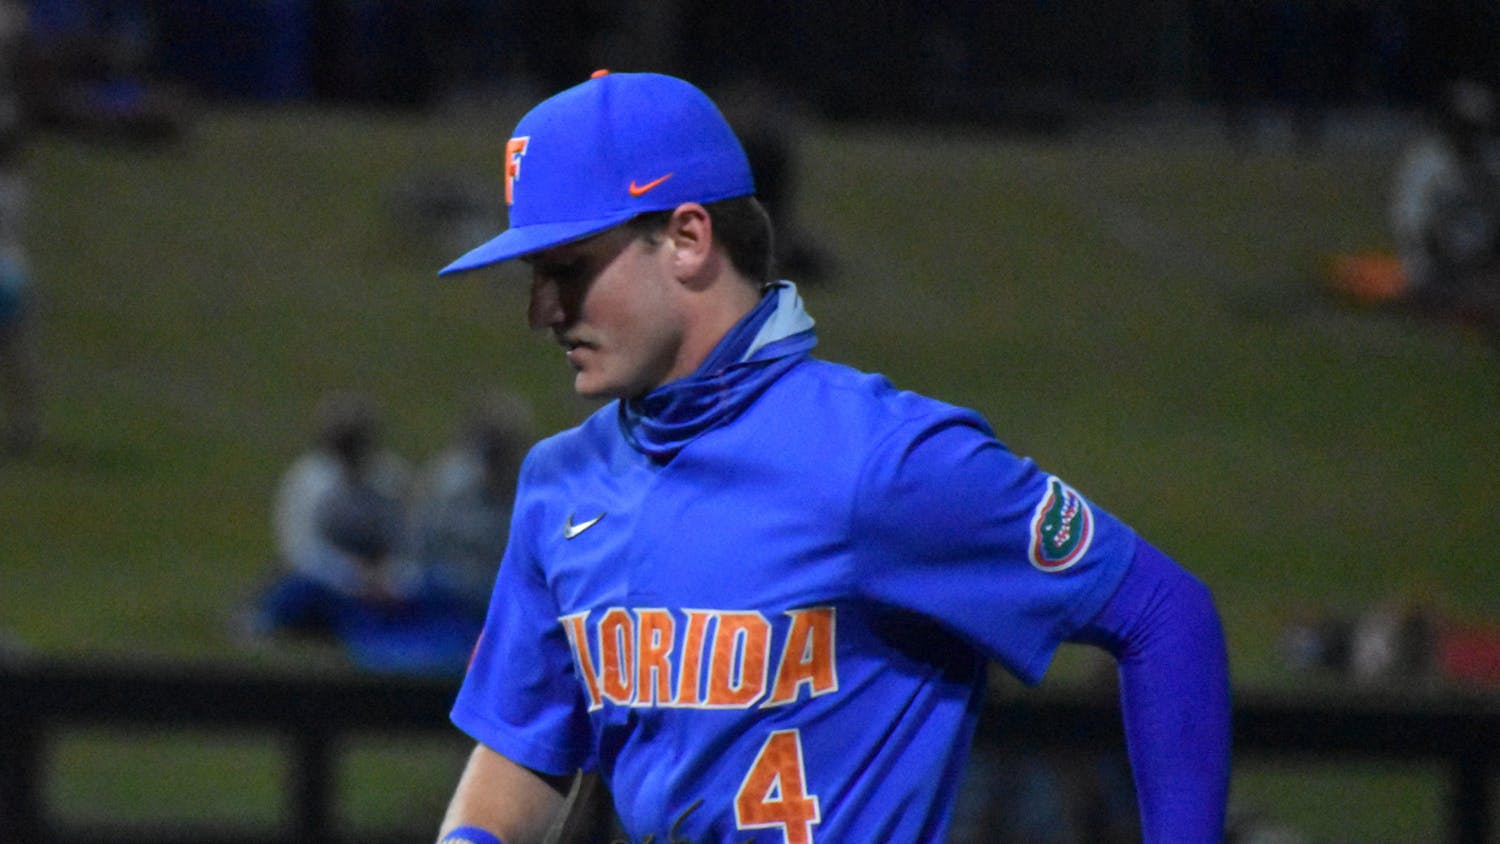 Florida outfielder Jud Fabian jogs off the field against Jacksonville on March 13. Fabian's reached base safely the past 23 games ahead of this weekend's contest against Georgia.